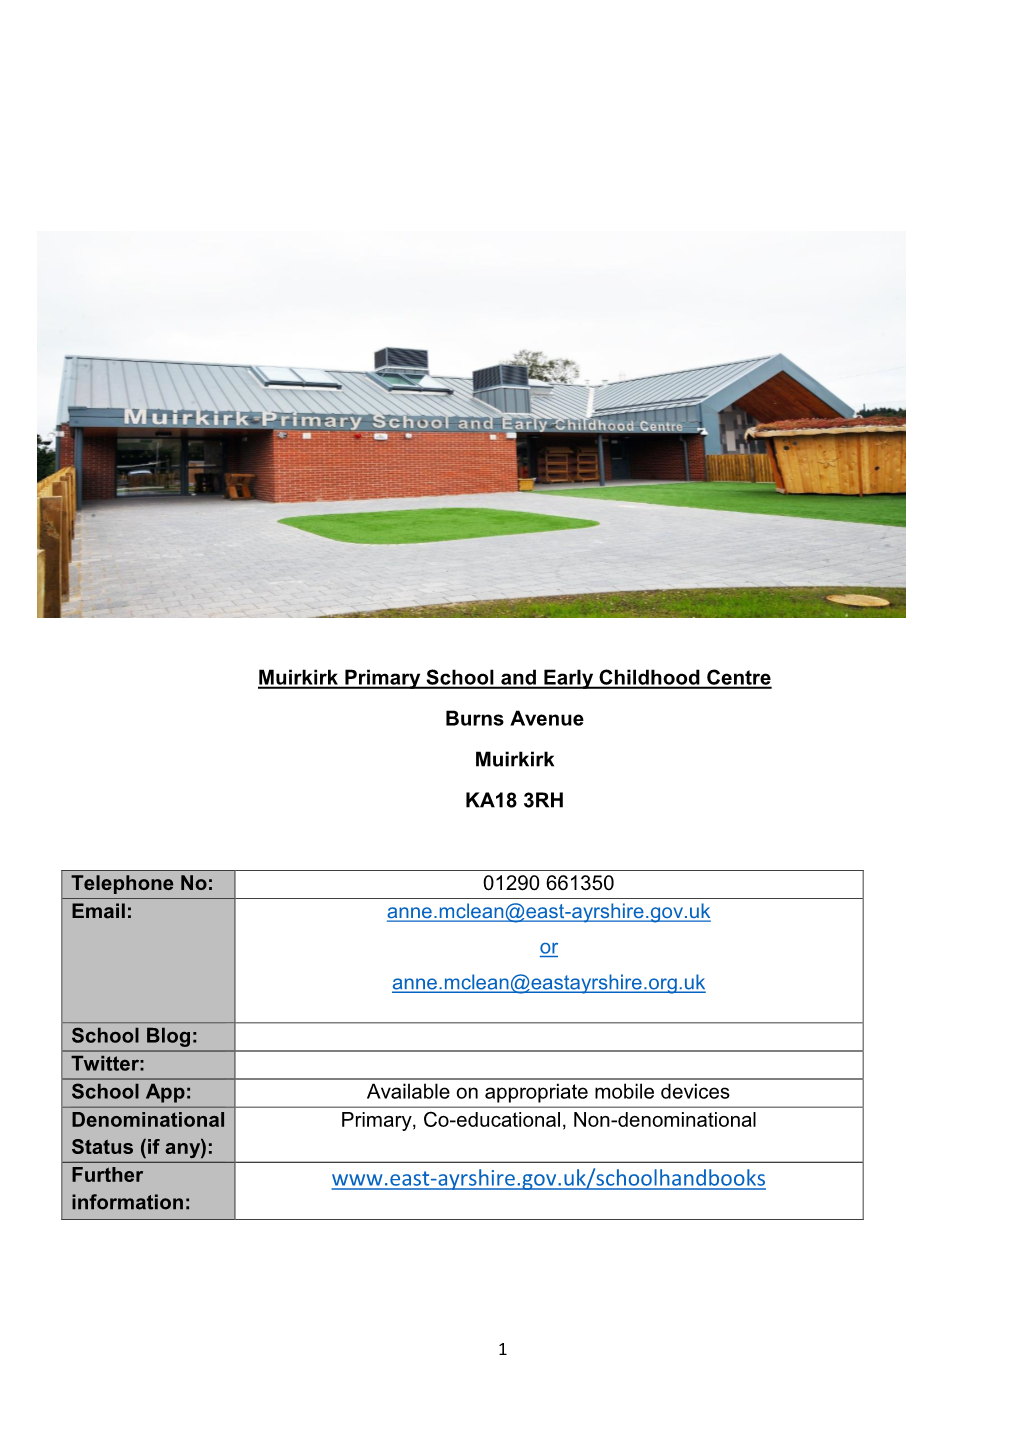 Muirkirk Primary School and Early Childhood Centre Handbook